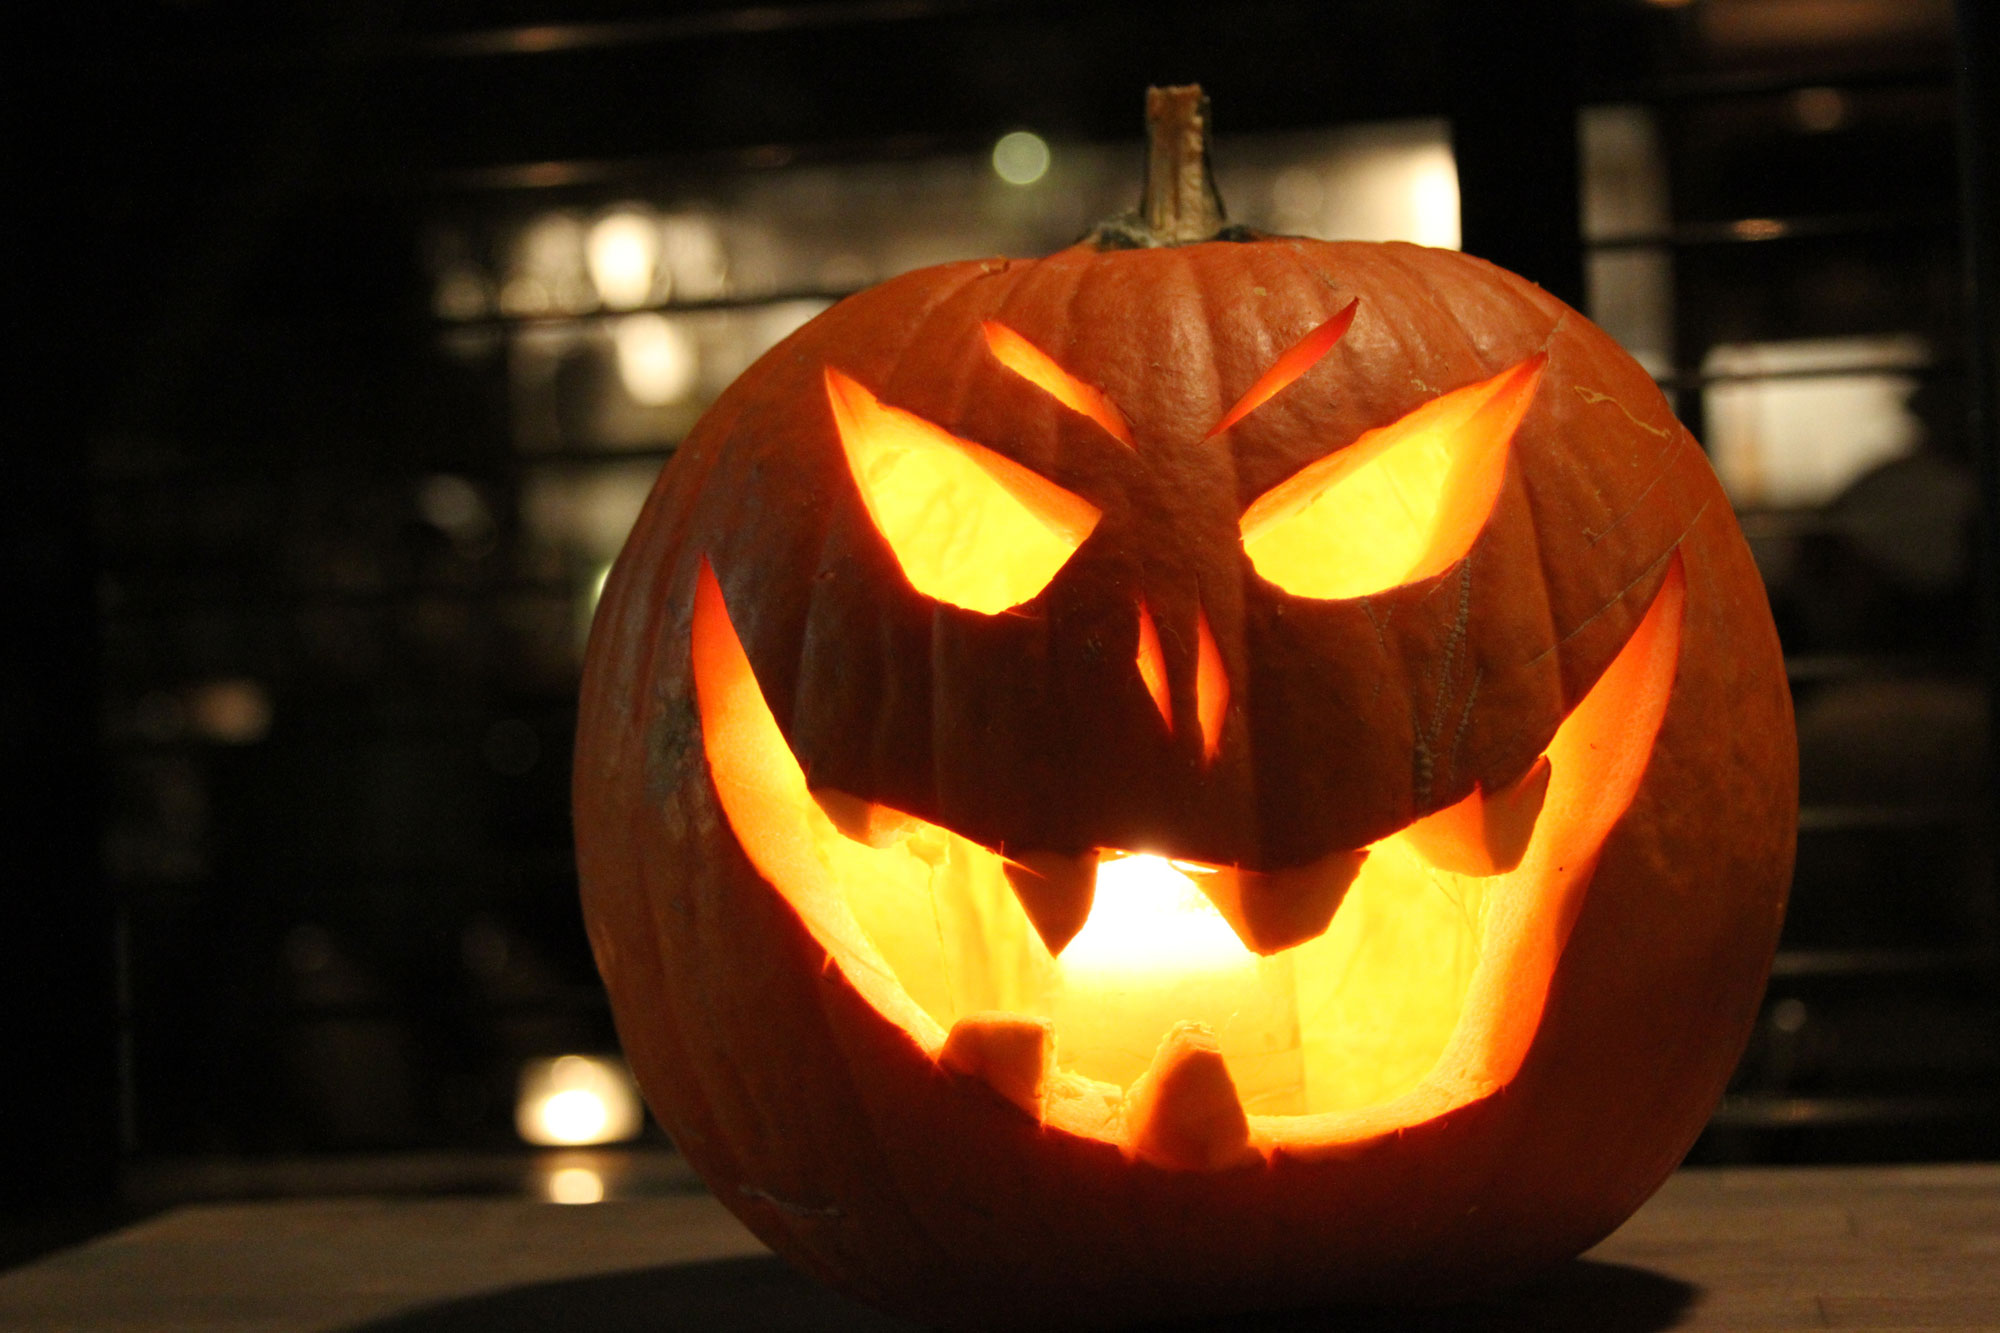 What's happening this weekend? TTC and road closures, pre-Halloween fun